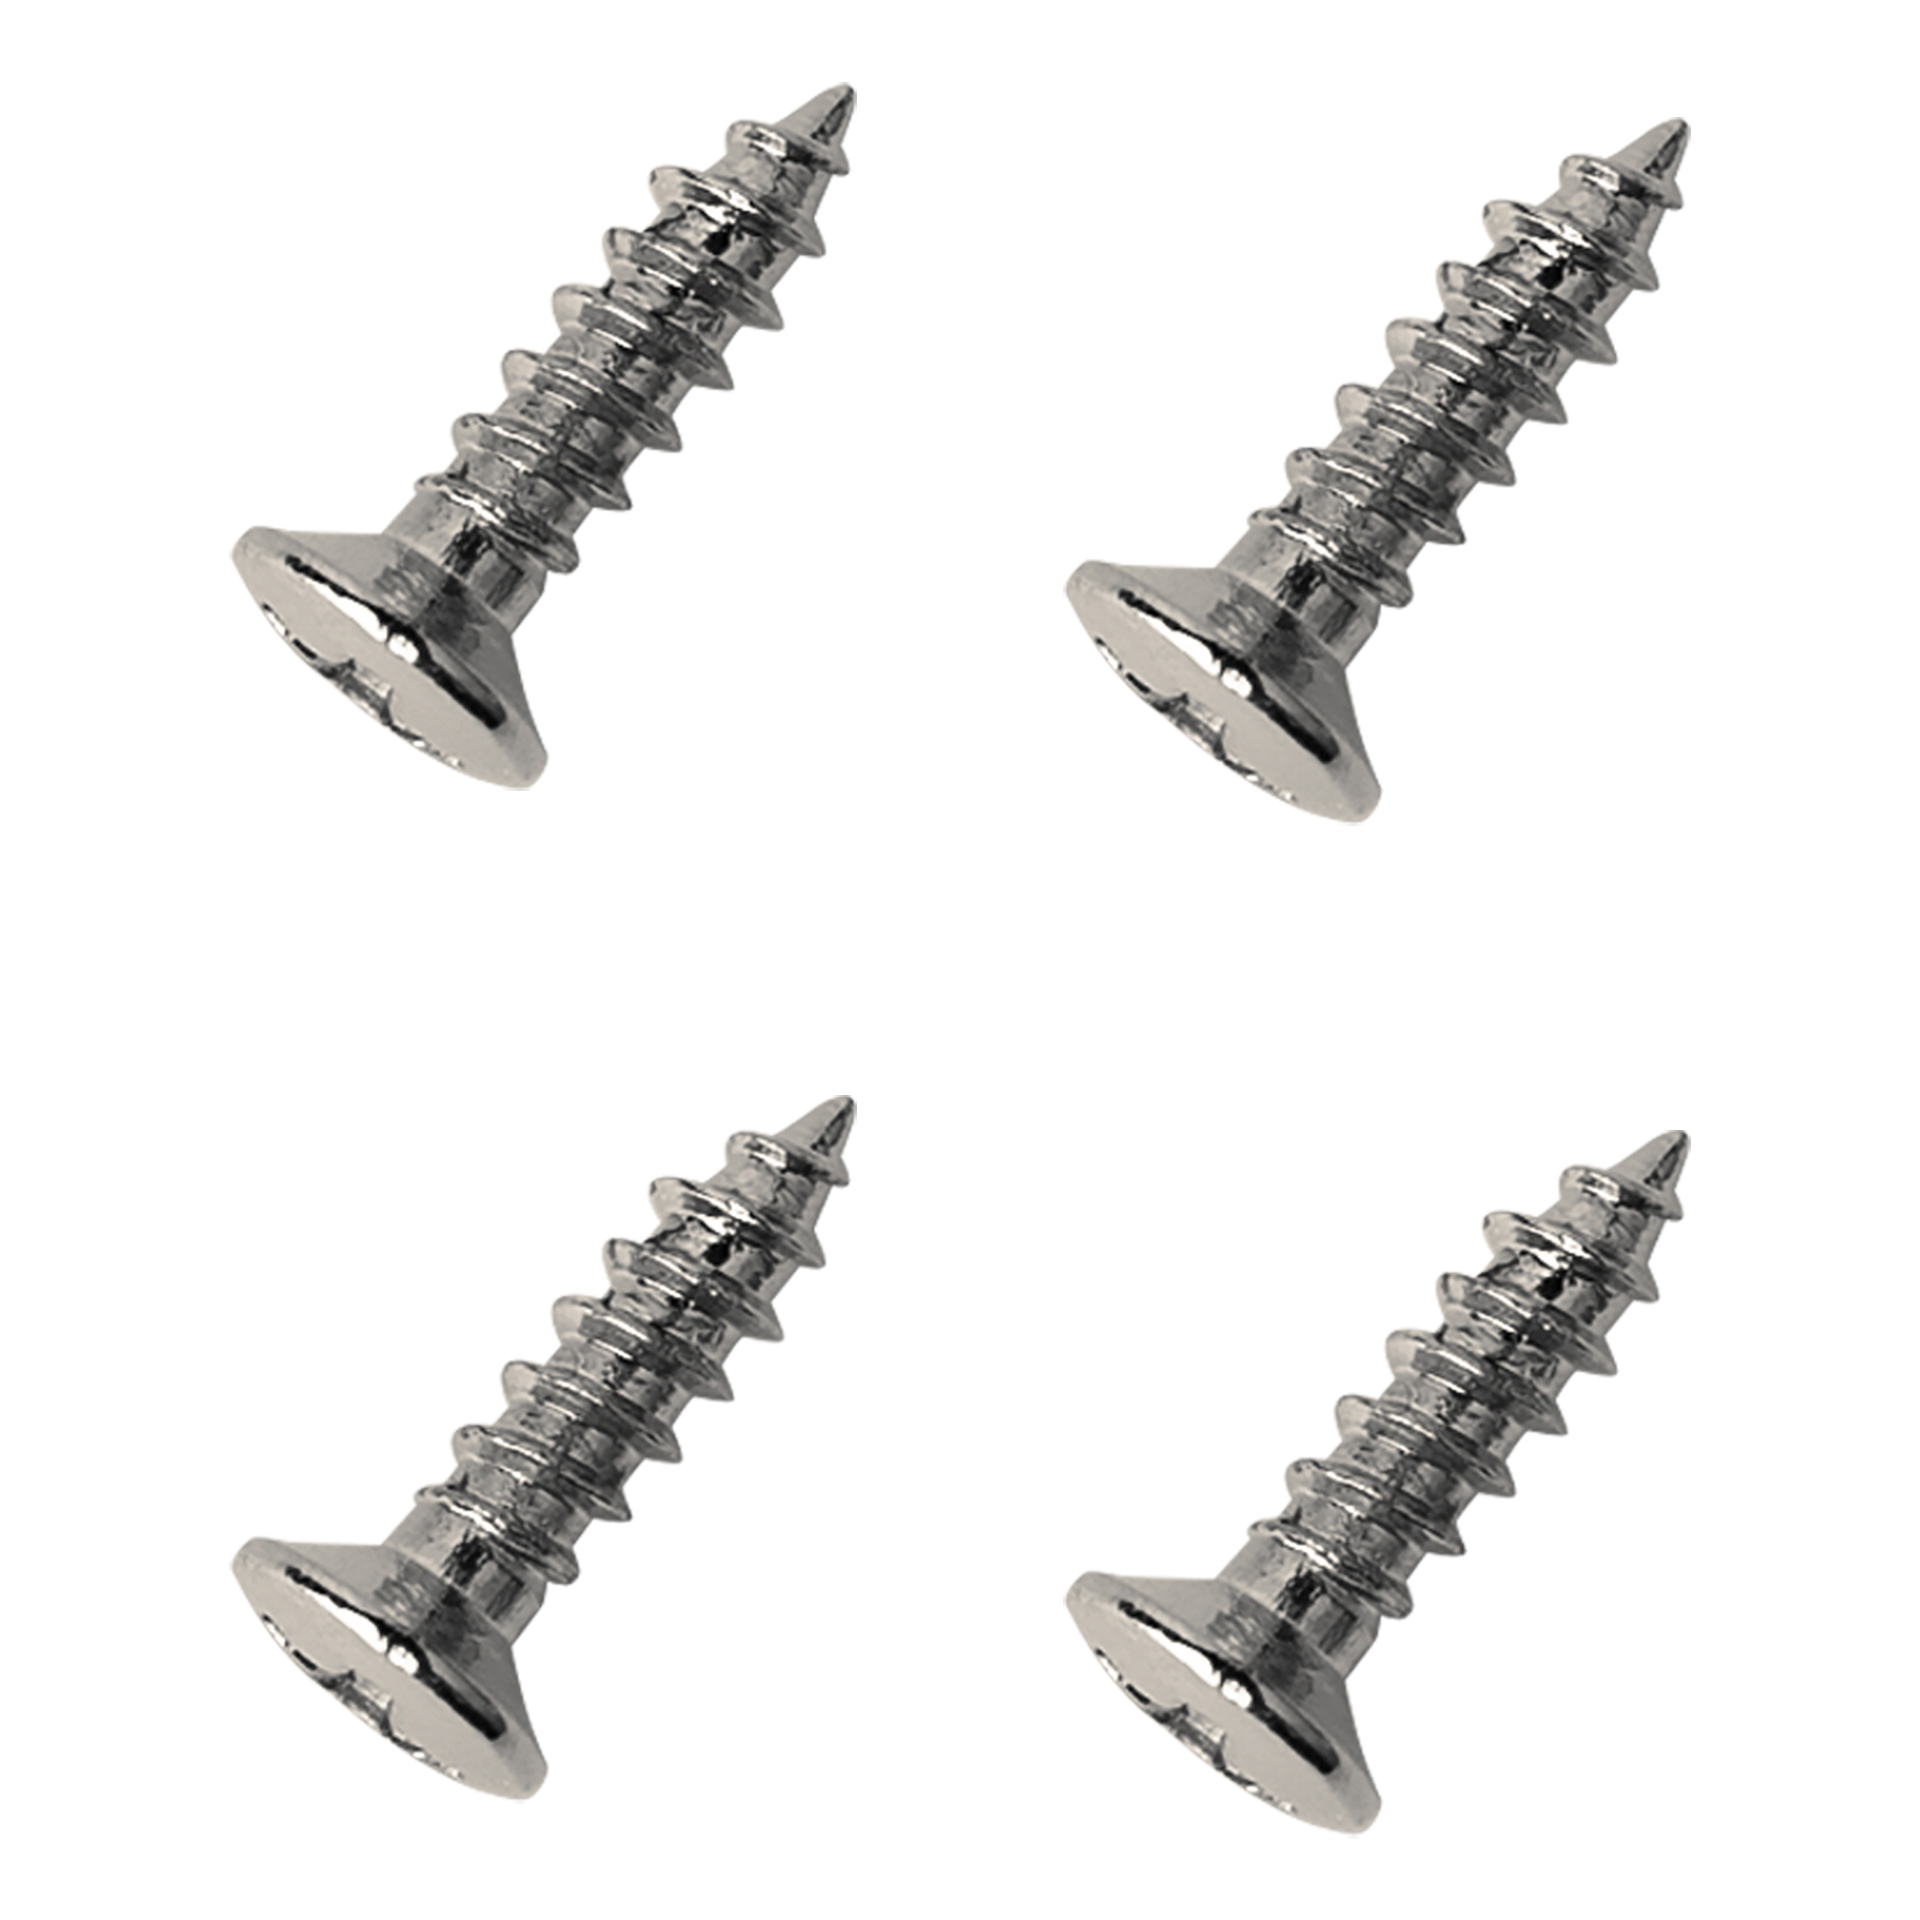 Framus & Warwick Parts - Countersunk Screw for Jack Plates & Pickguards, 3 x 12 mm - Stainless Steel, 4 pcs.